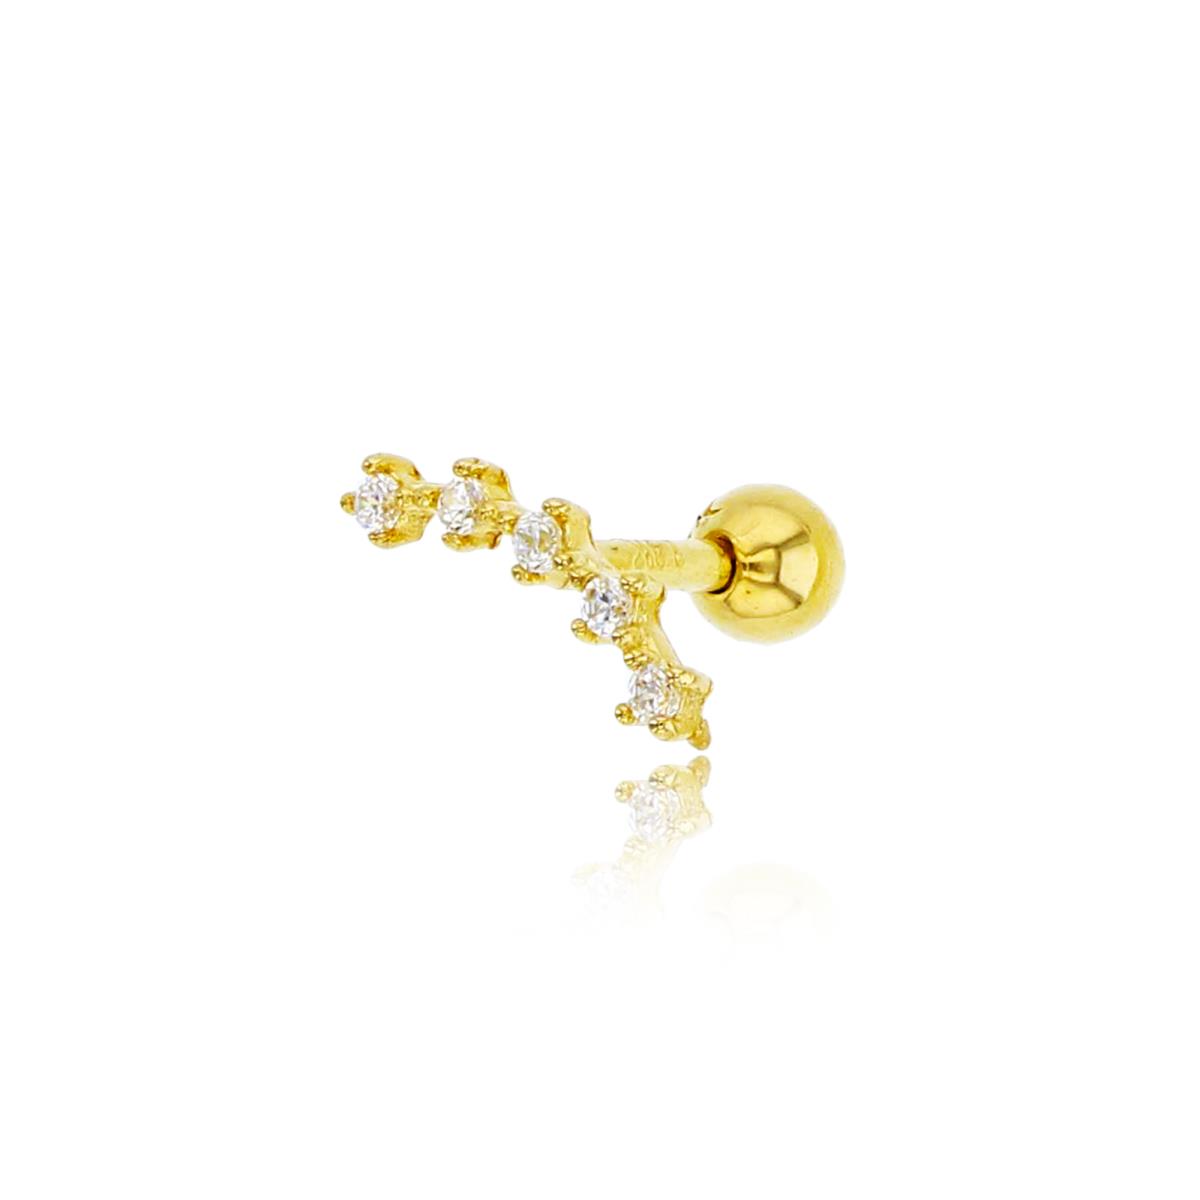 14K Yellow Gold 1.1mm Rd CZ Curved Bar Ear/Nose Stud with Ball Screw-Back